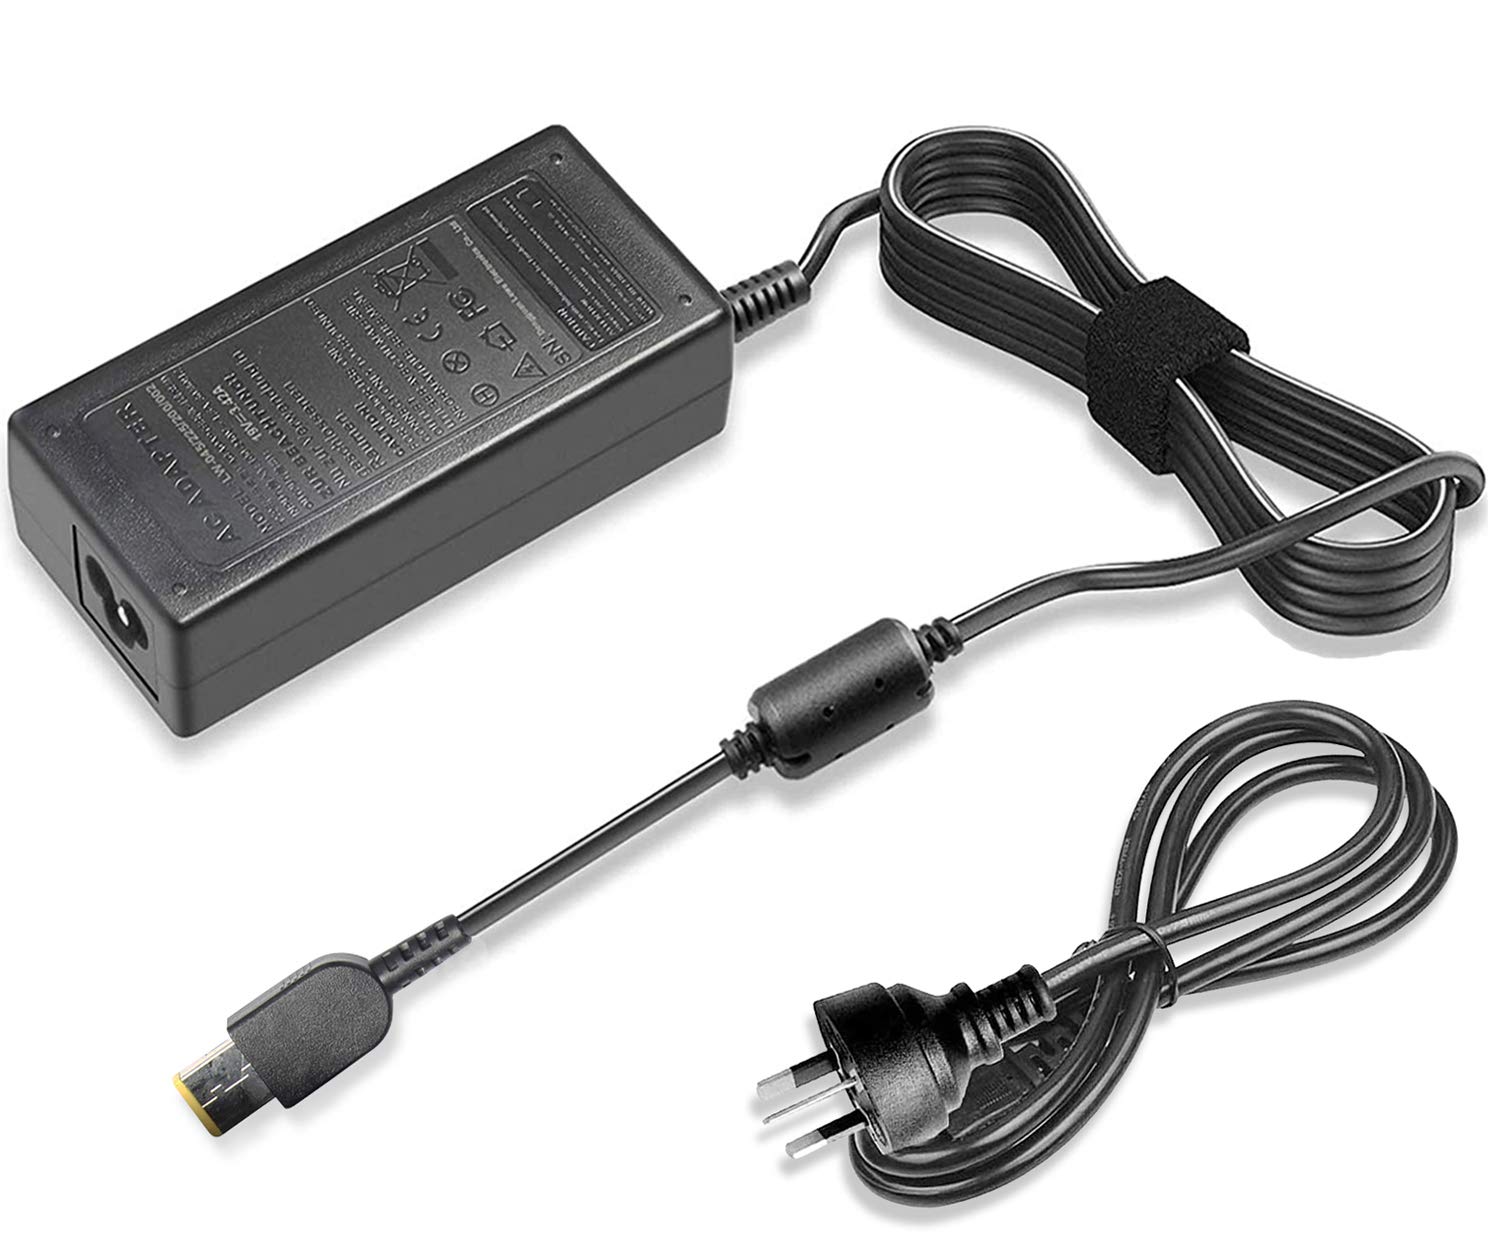 Find a compatible power adapter from another Lenovo laptop or borrow one.
Connect the alternative power adapter to the laptop and check if it powers on.